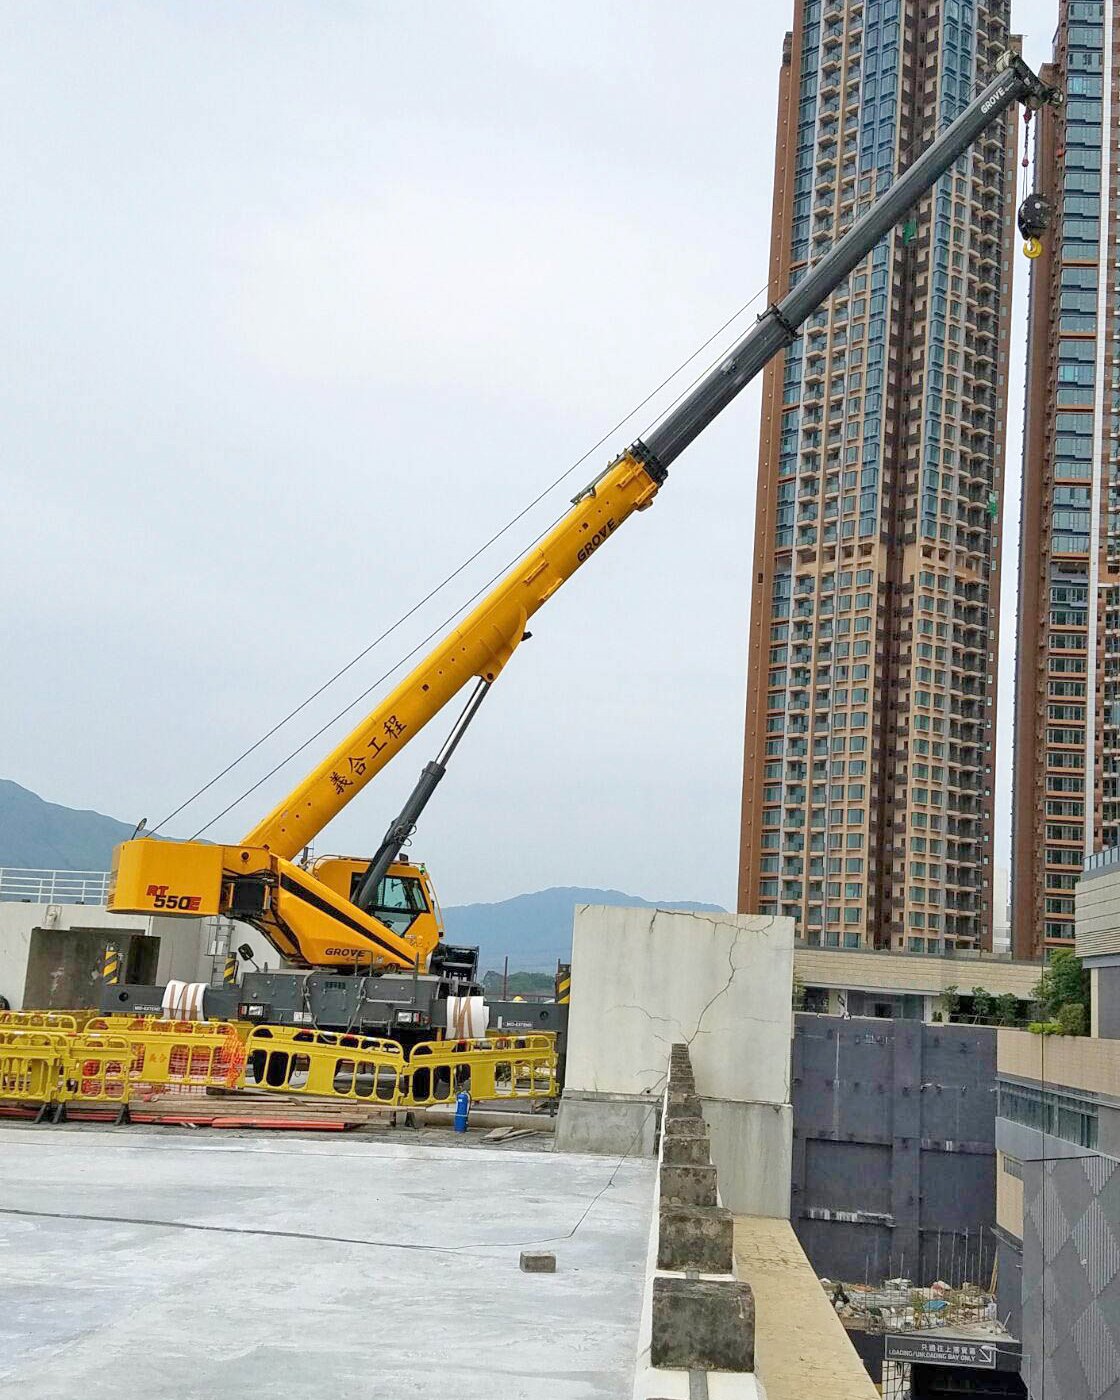 The Yuen Long MTR station in Hong Kong is undergoing a series of improvements which include upgrading vehicular access to the site. On the job is a Grove RT550E rough-terrain crane, which Yee Hop Engineering Co. Ltd., has positioned on the station roof to hoist up construction materials including steel bars and cement, with loads weighing up to 14 t.